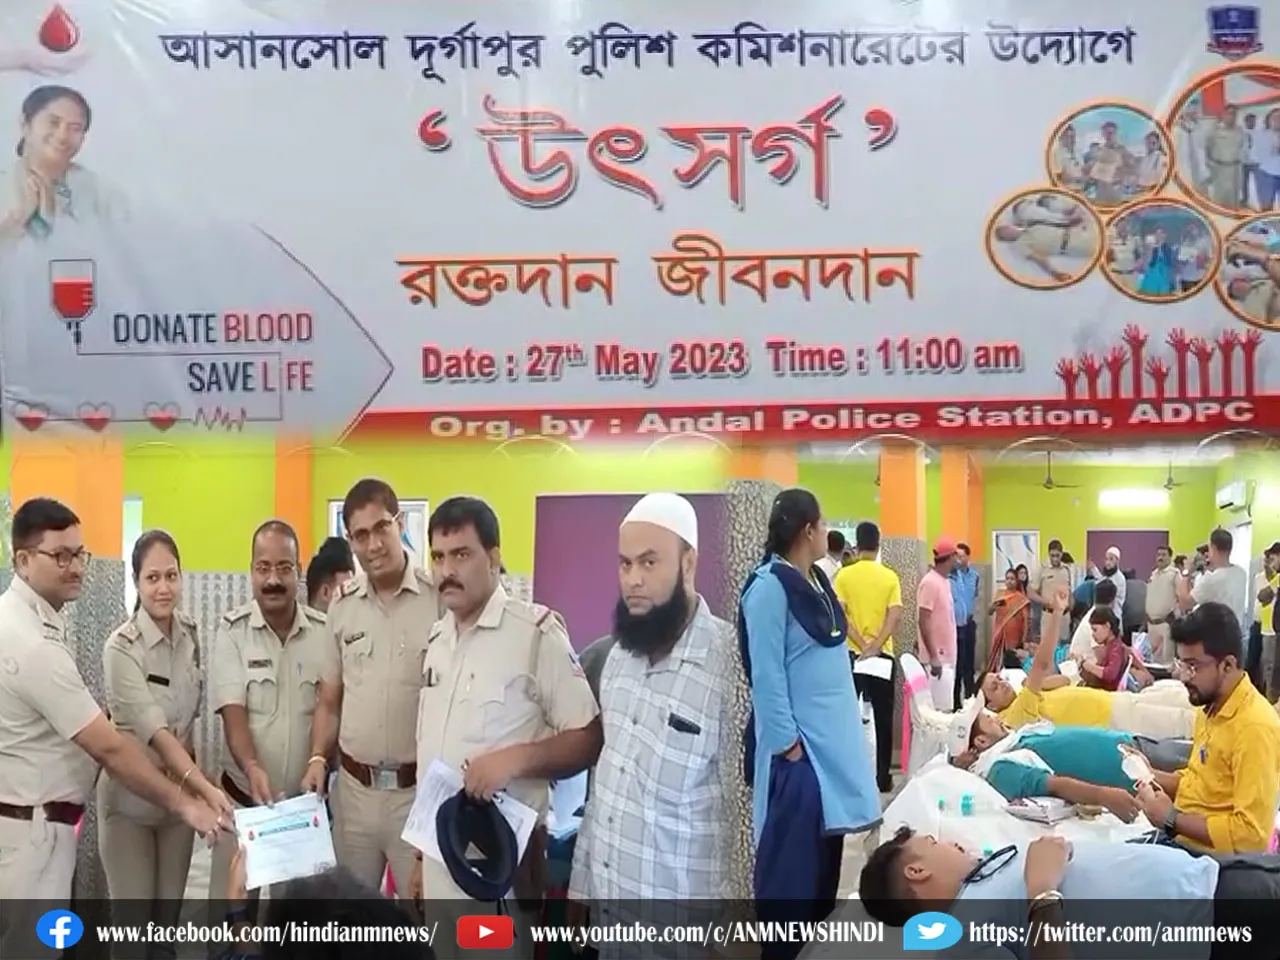 Blood Donation Camp at andal